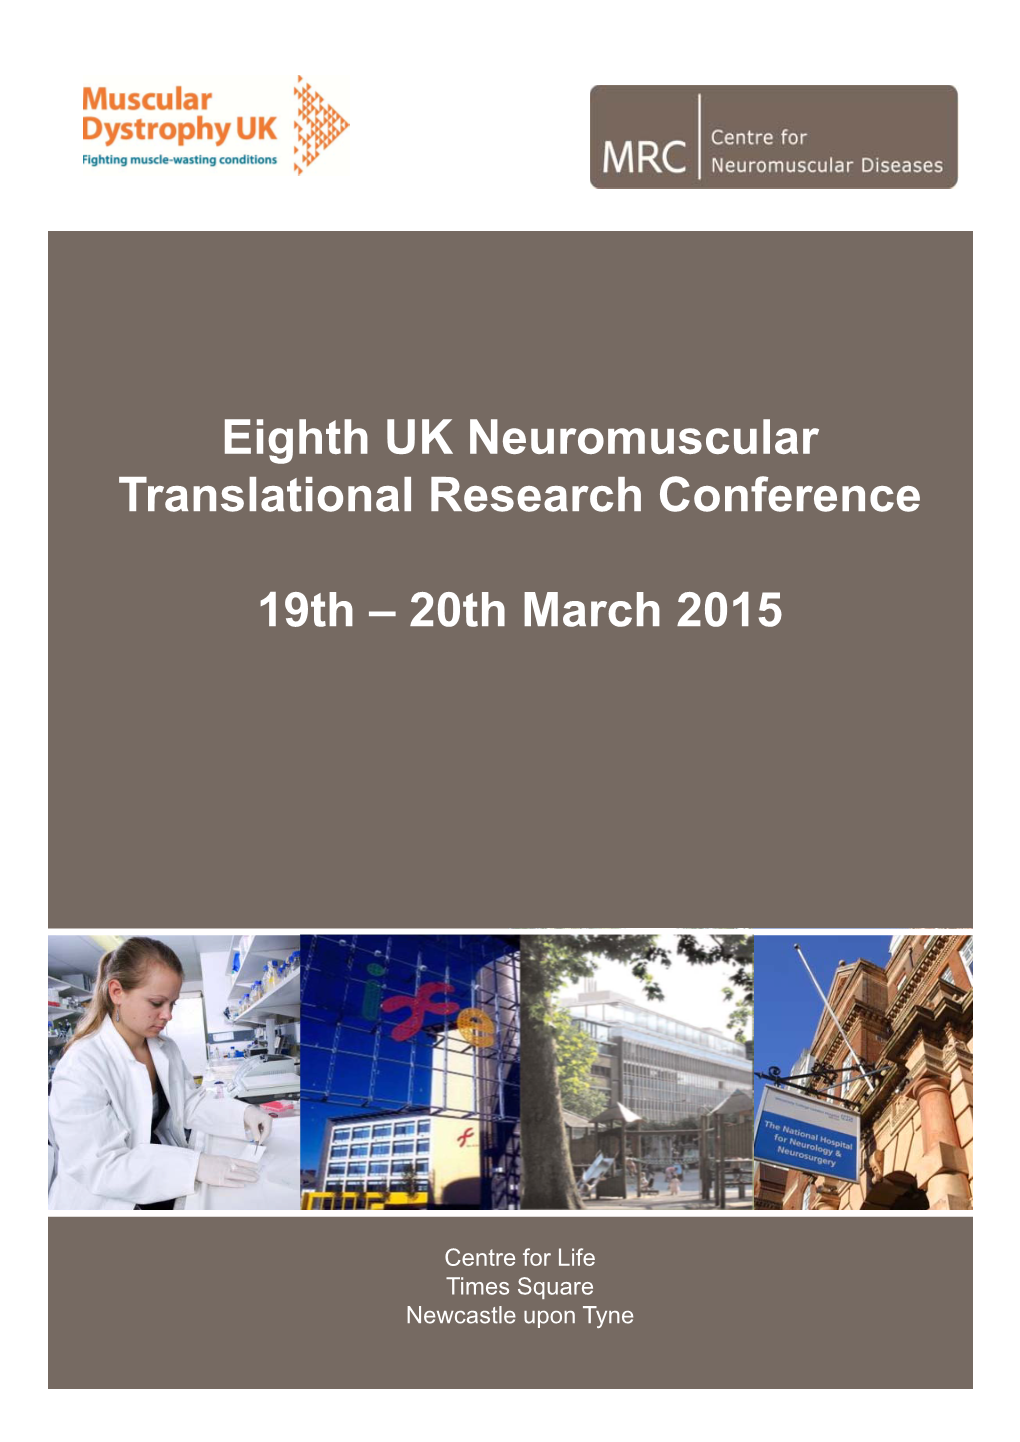 Eighth UK Neuromuscular Translational Research Conference